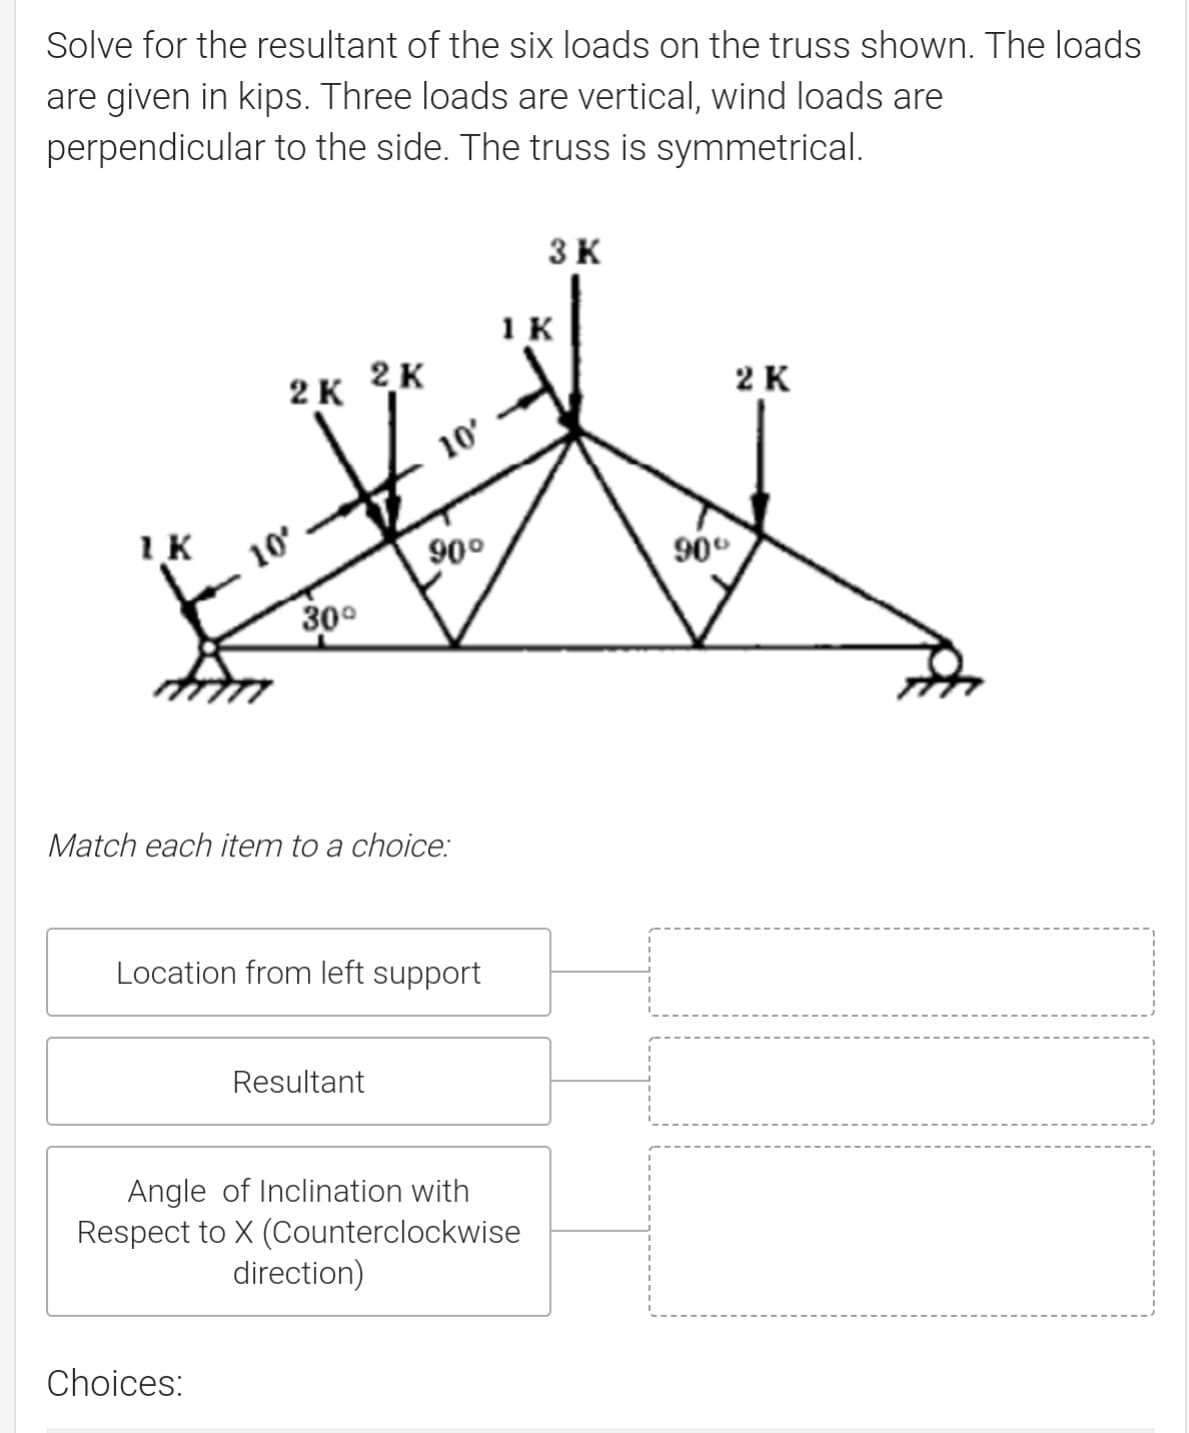 Solve for the resultant of the six loads on the truss shown. The loads
are given in kips. Three loads are vertical, wind loads are
perpendicular to the side. The truss is symmetrical.
3 K
1 K
2K 2K
2 K
10'
IK
10
90°
90°
30°
Match each item to a choice:
Location from left support
Resultant
Angle of Inclination with
Respect to X (Counterclockwise
direction)
Choices:
